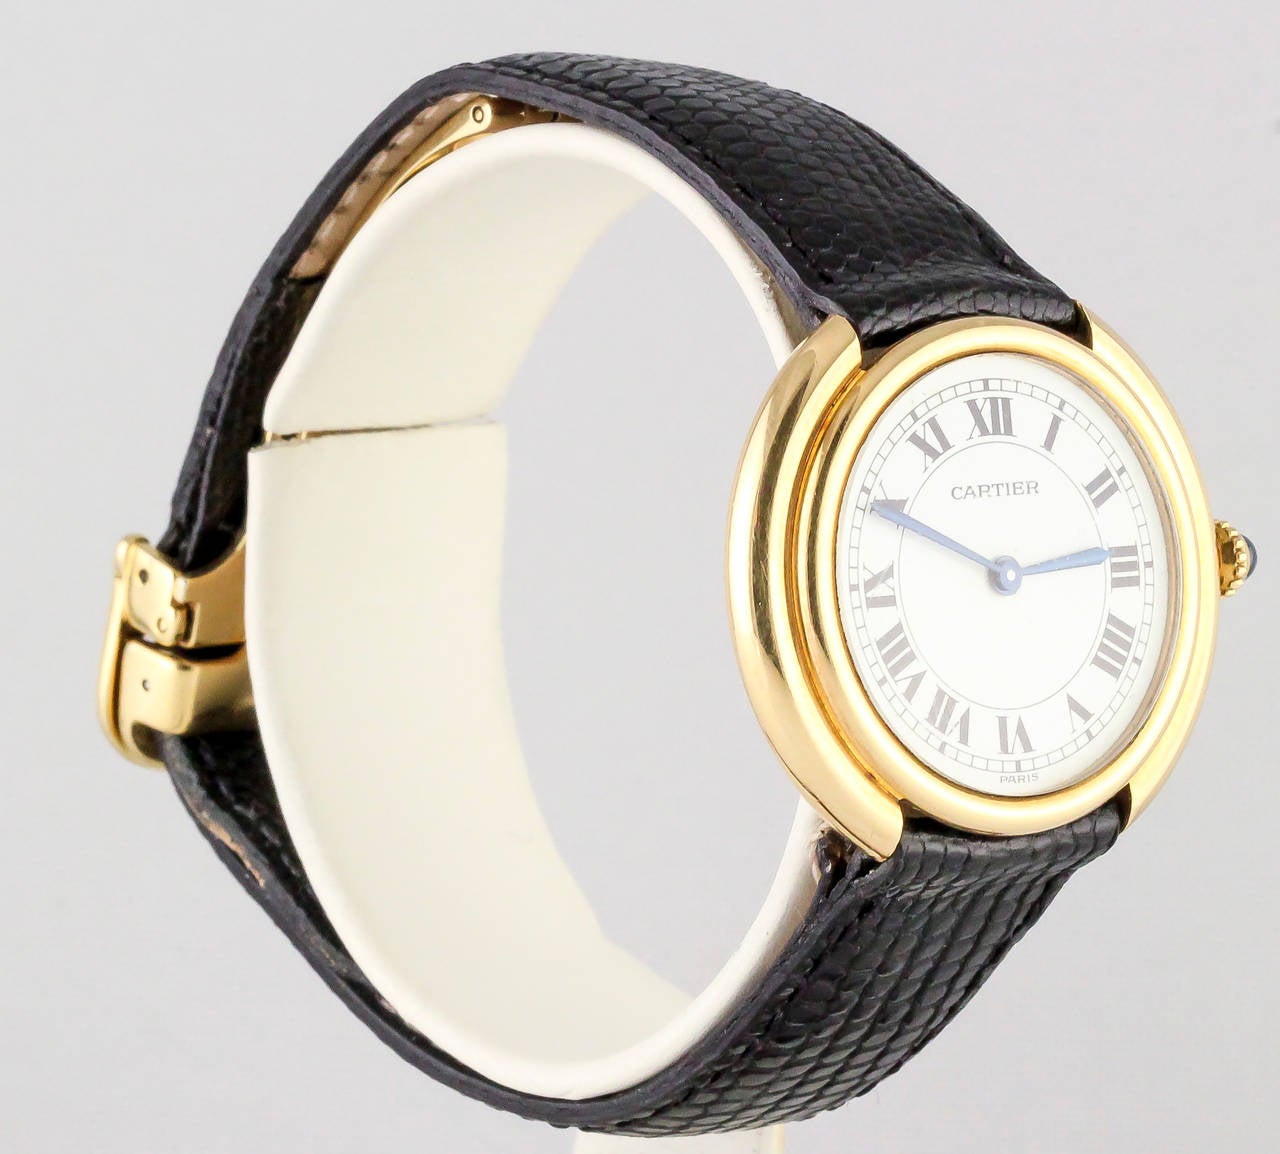 Refined 18K yellow gold wrist watch from the 